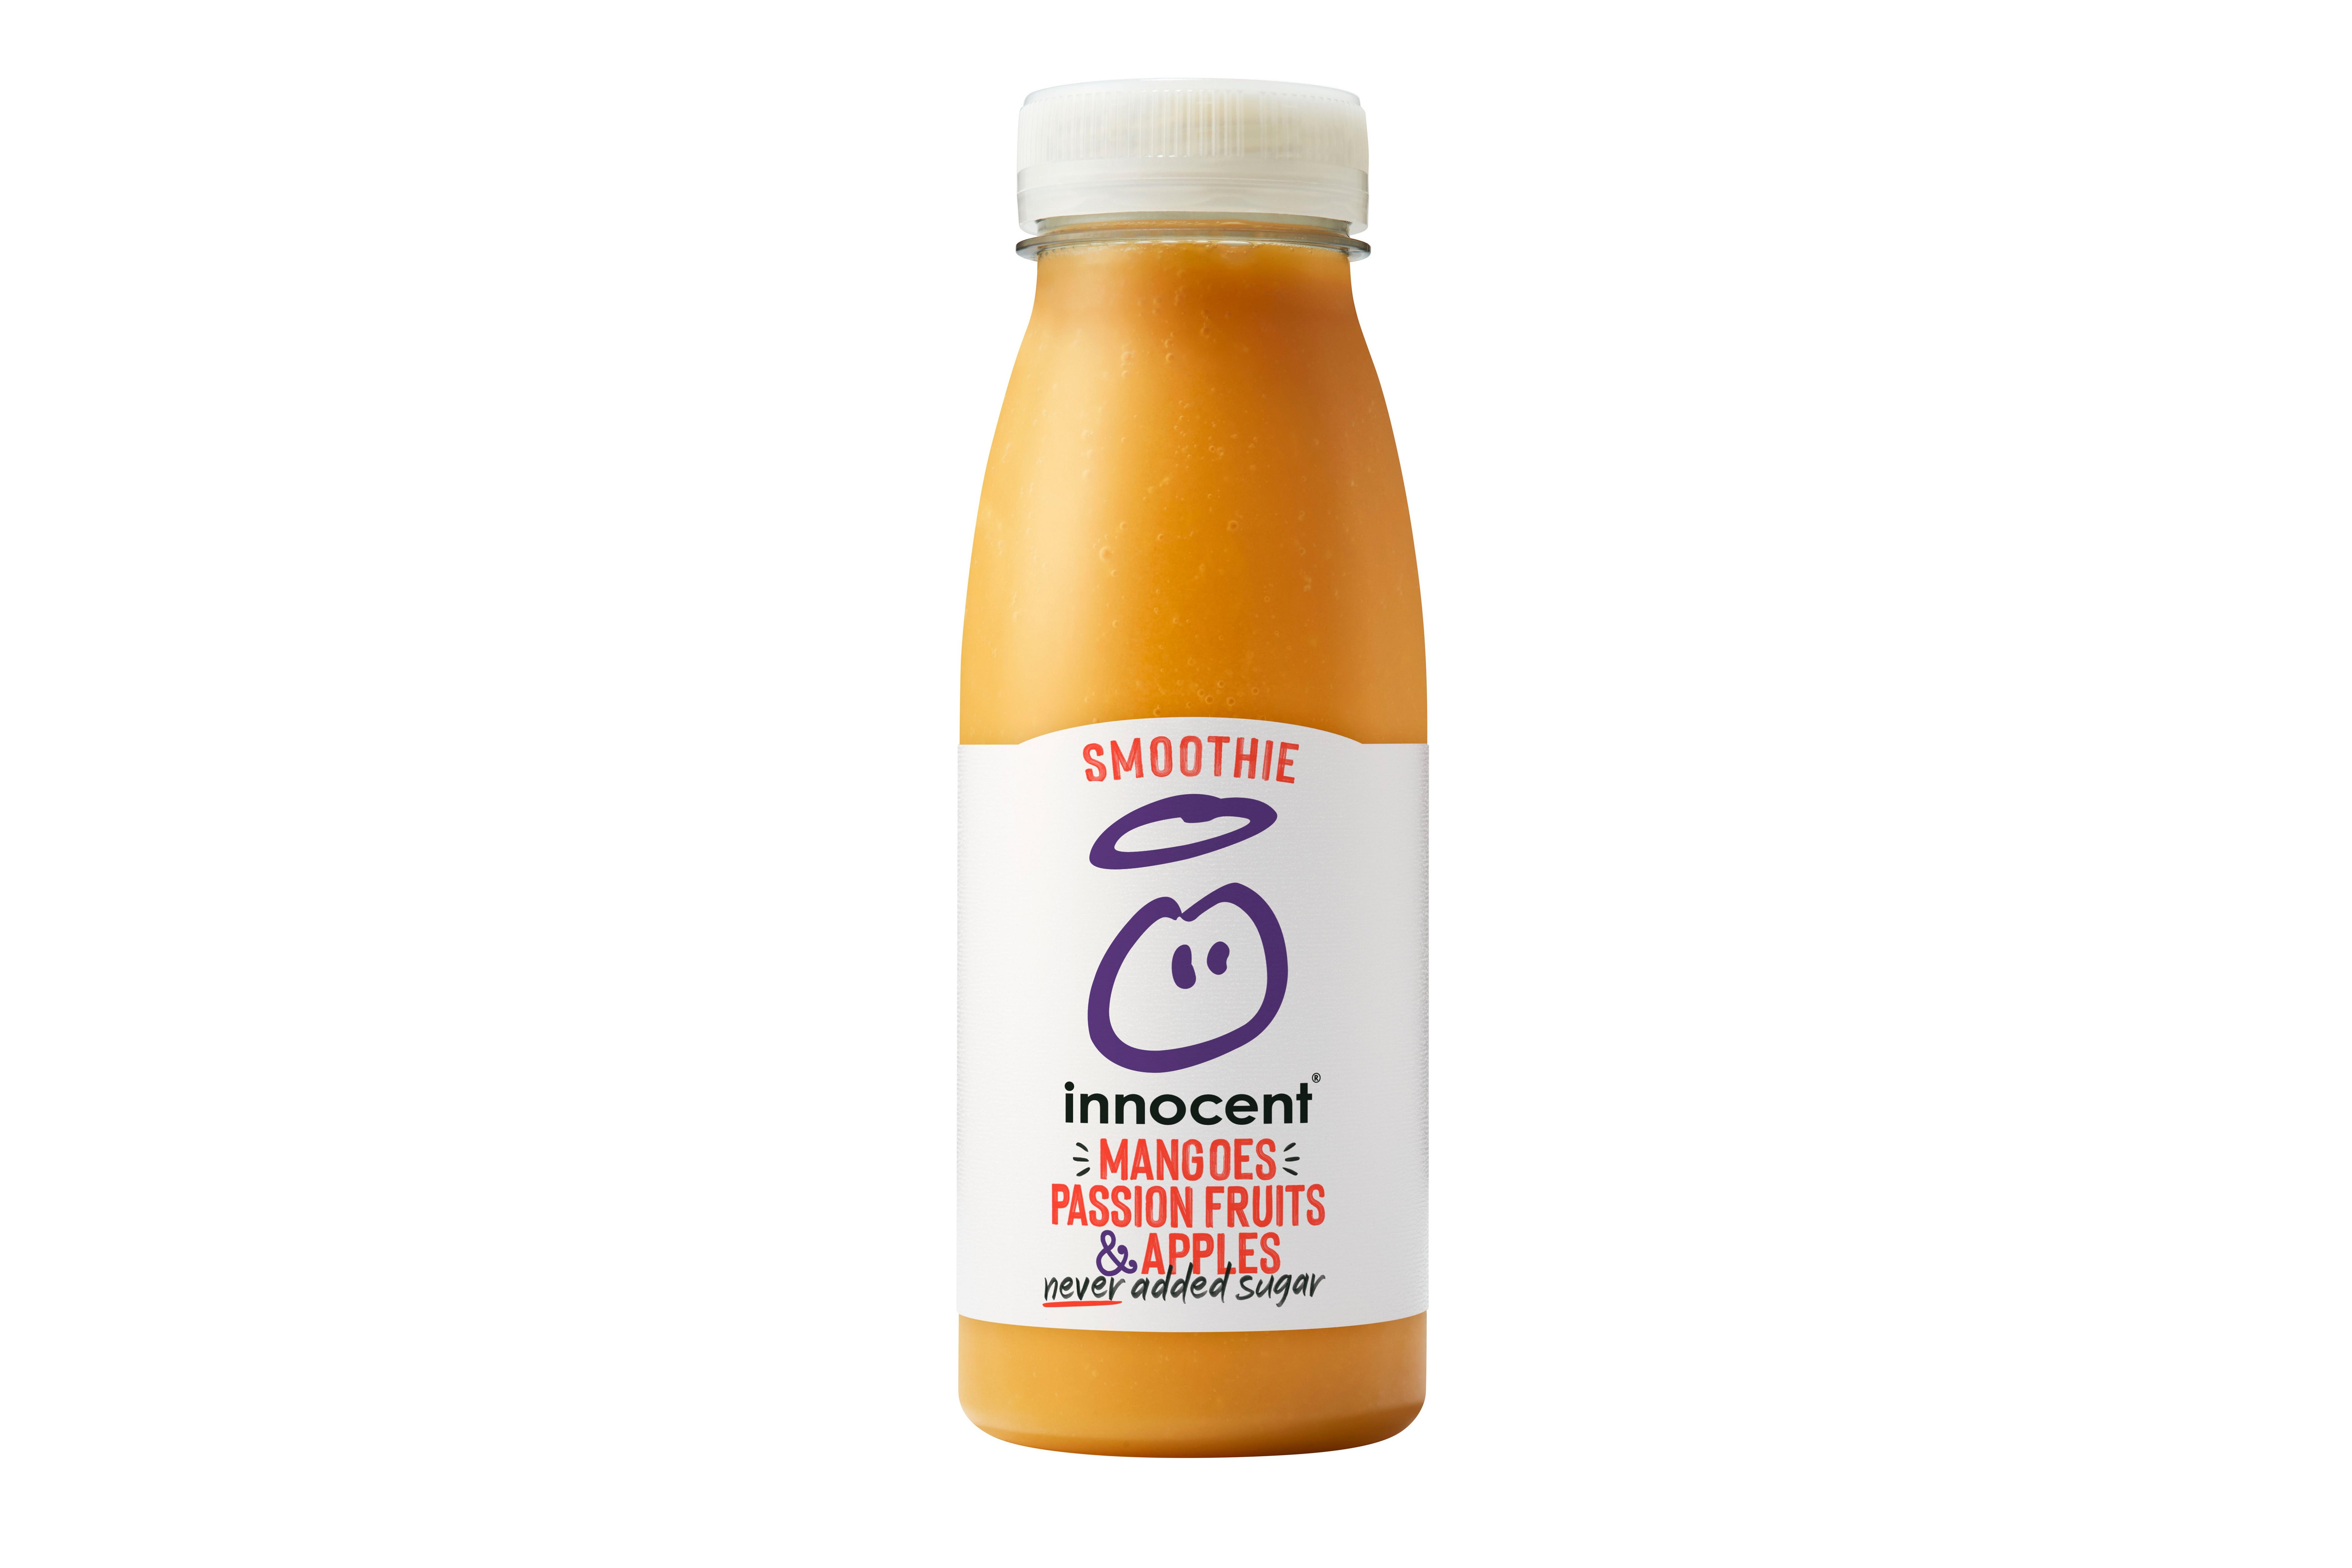 Innocent Smoothie Mangoes Passion Fruits & Apples 250ml Wholesale – Buy Innocent  Smoothie Mangoes Passion Fruits & Apples 250ml in Bulk | Brakes Food Shop